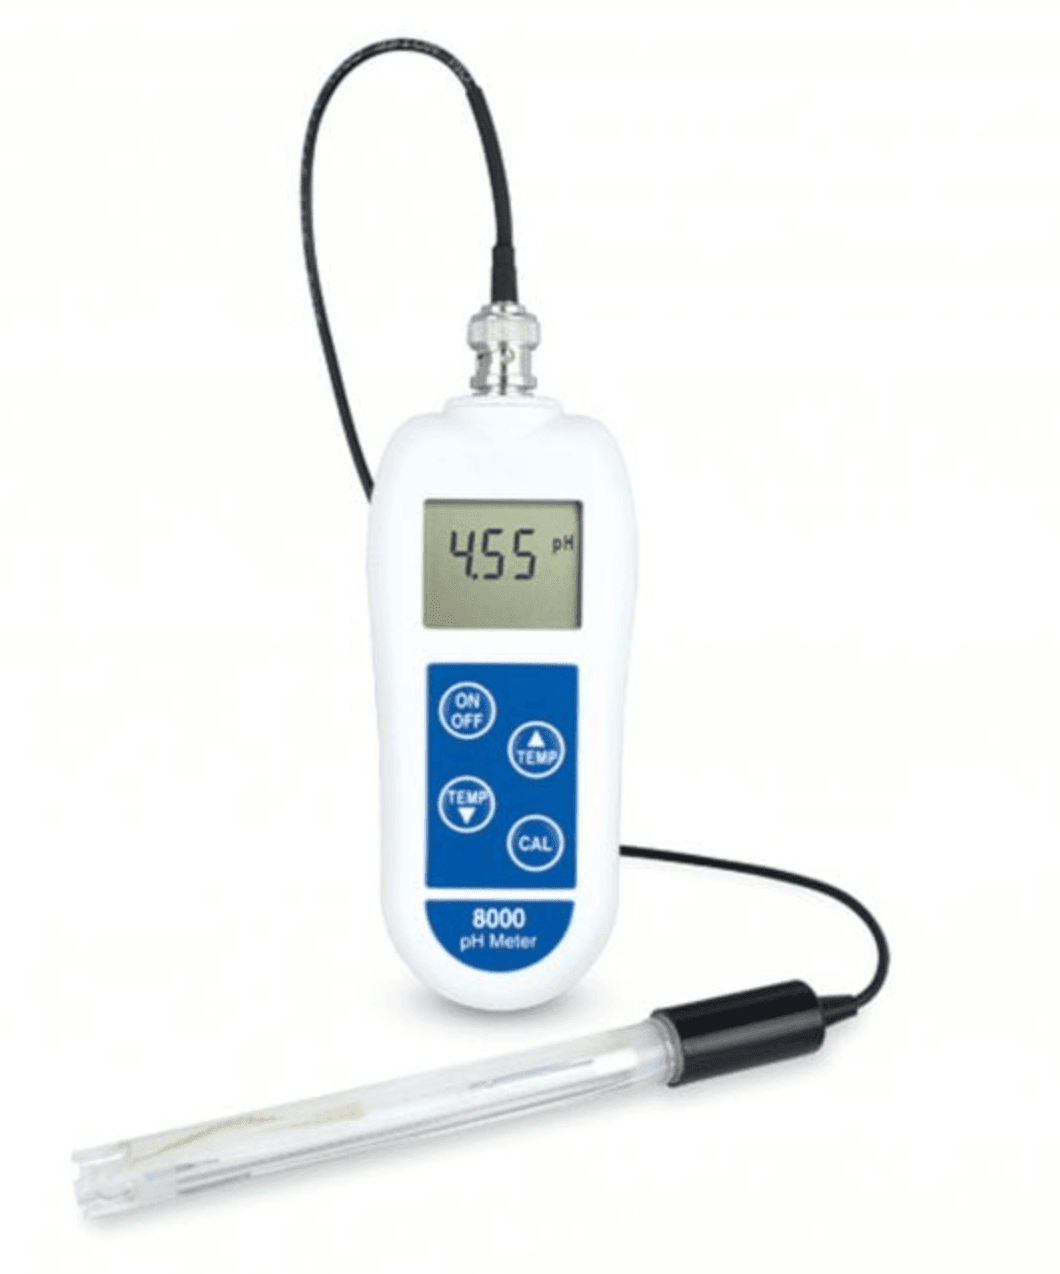 Answers related to pH test meter